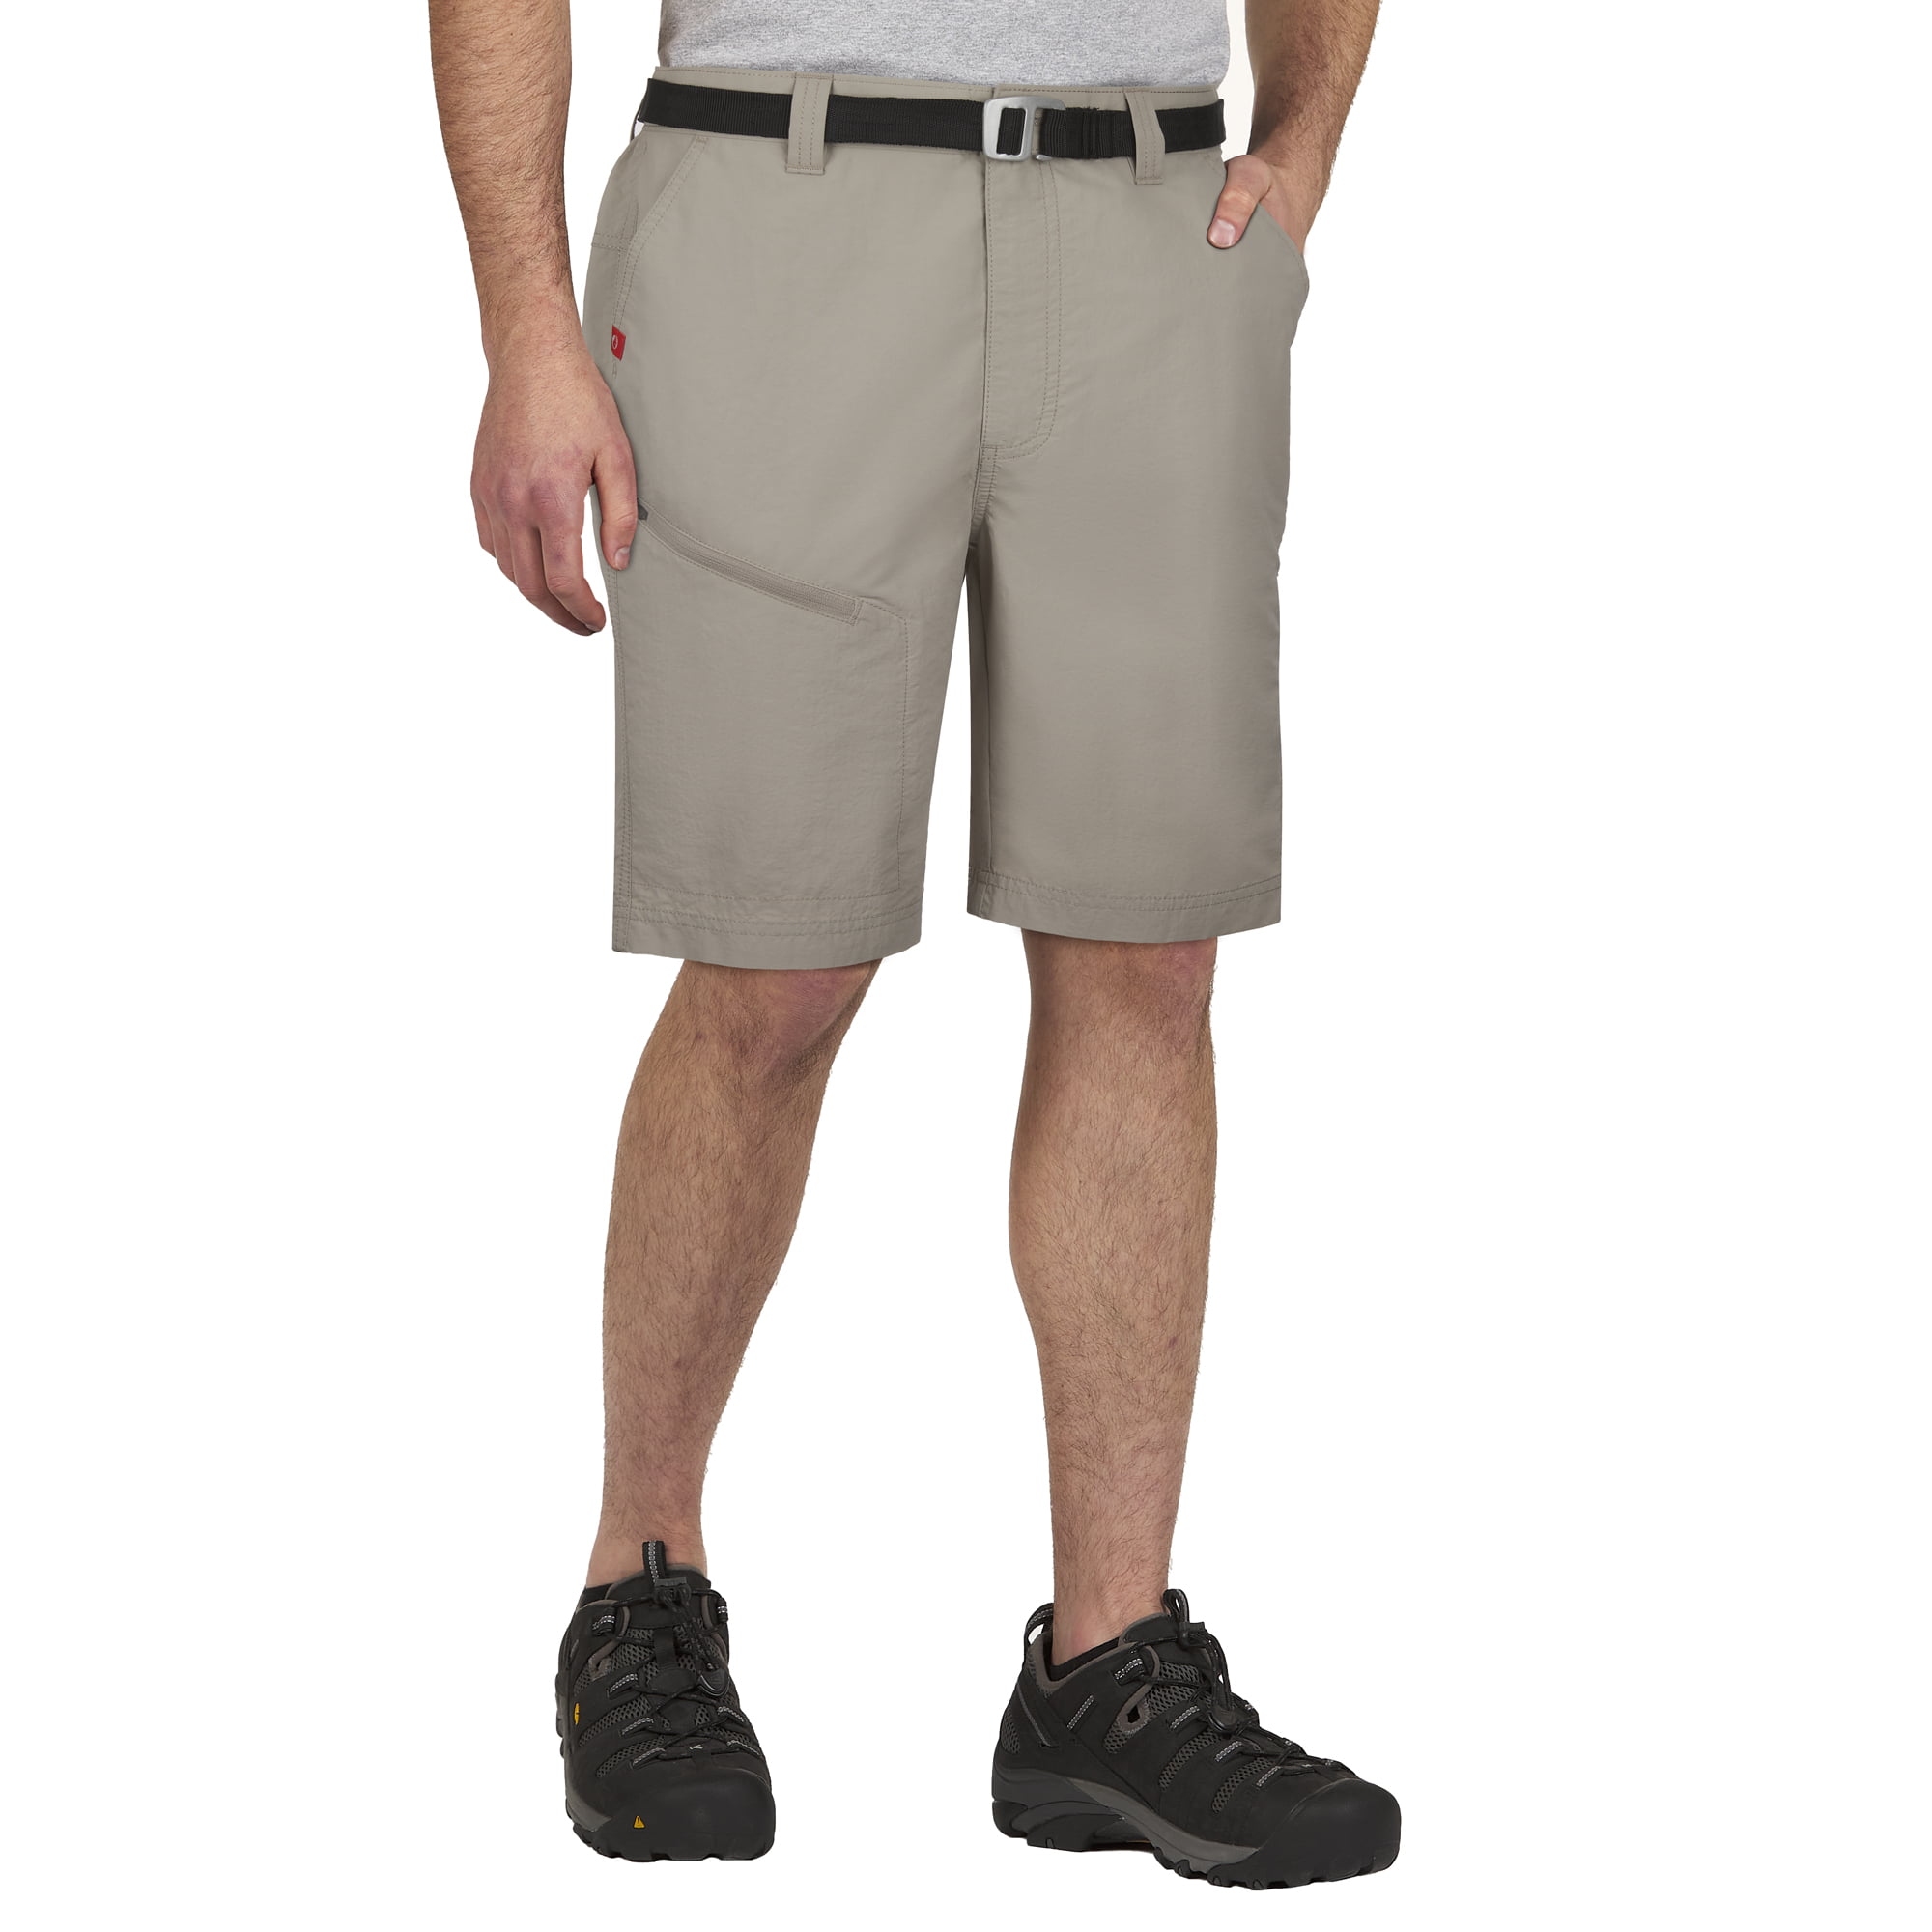 APTRO Men's Cargo Shorts Twill Relaxed Fit Multi-Pockets Outdoor Casual Shorts No Belt